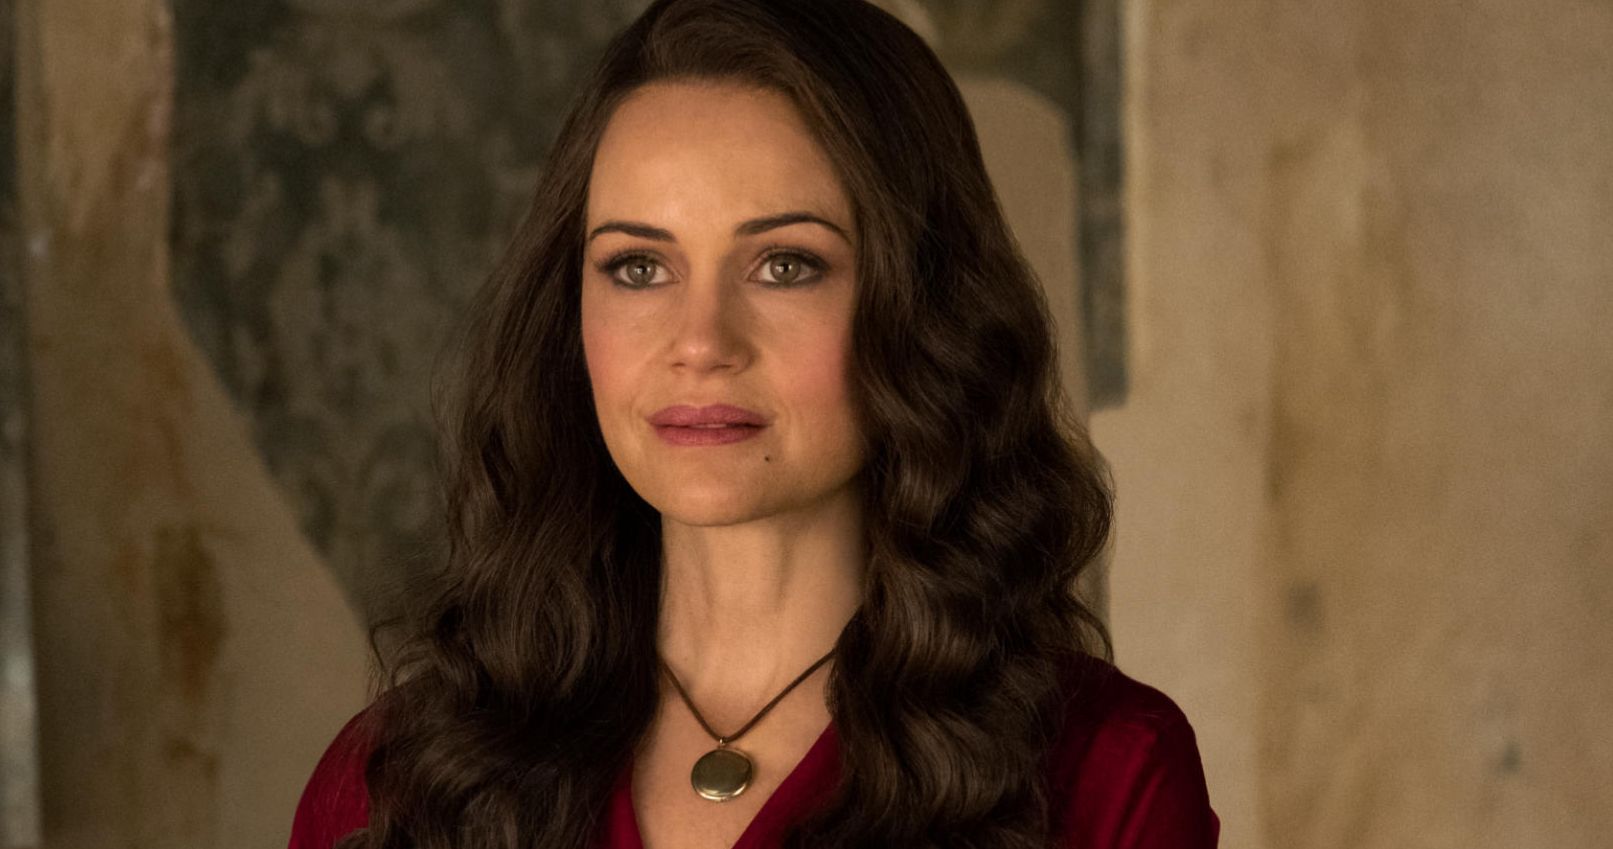 Is Carla Gugino Returning for Haunting of Hill House Season 2 Bly Manor?